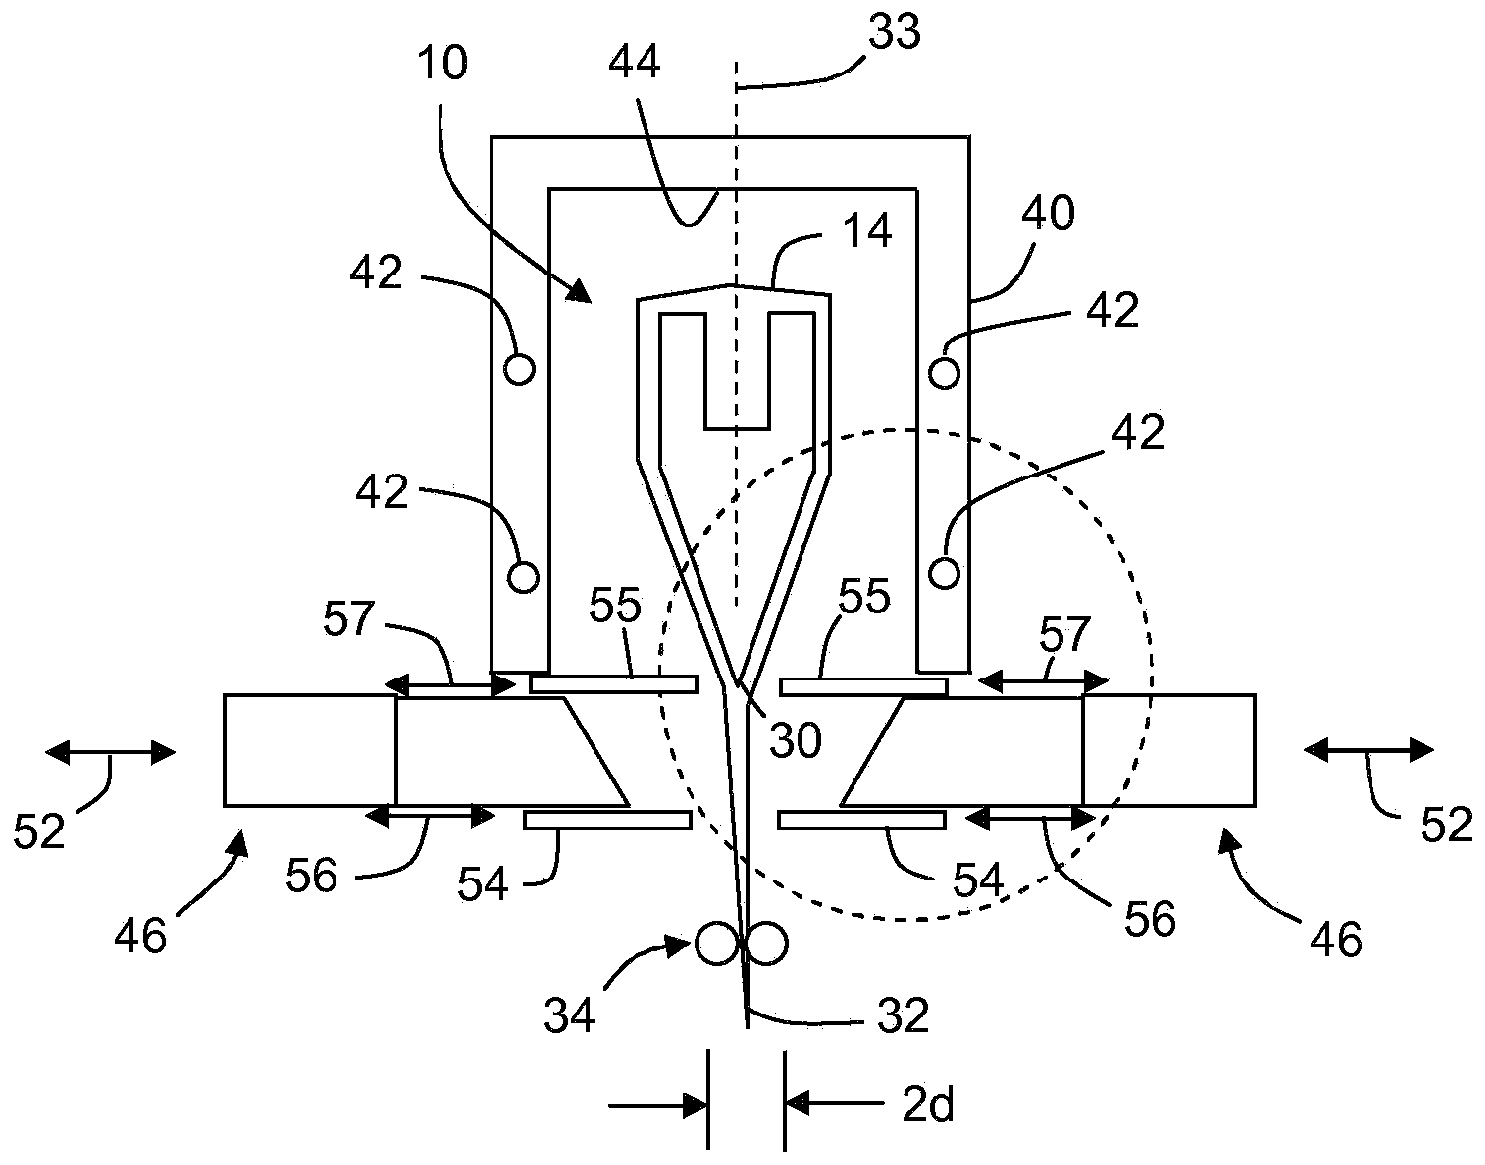 Apparatus for reducing radiative heat loss from a forming body in a glass forming process